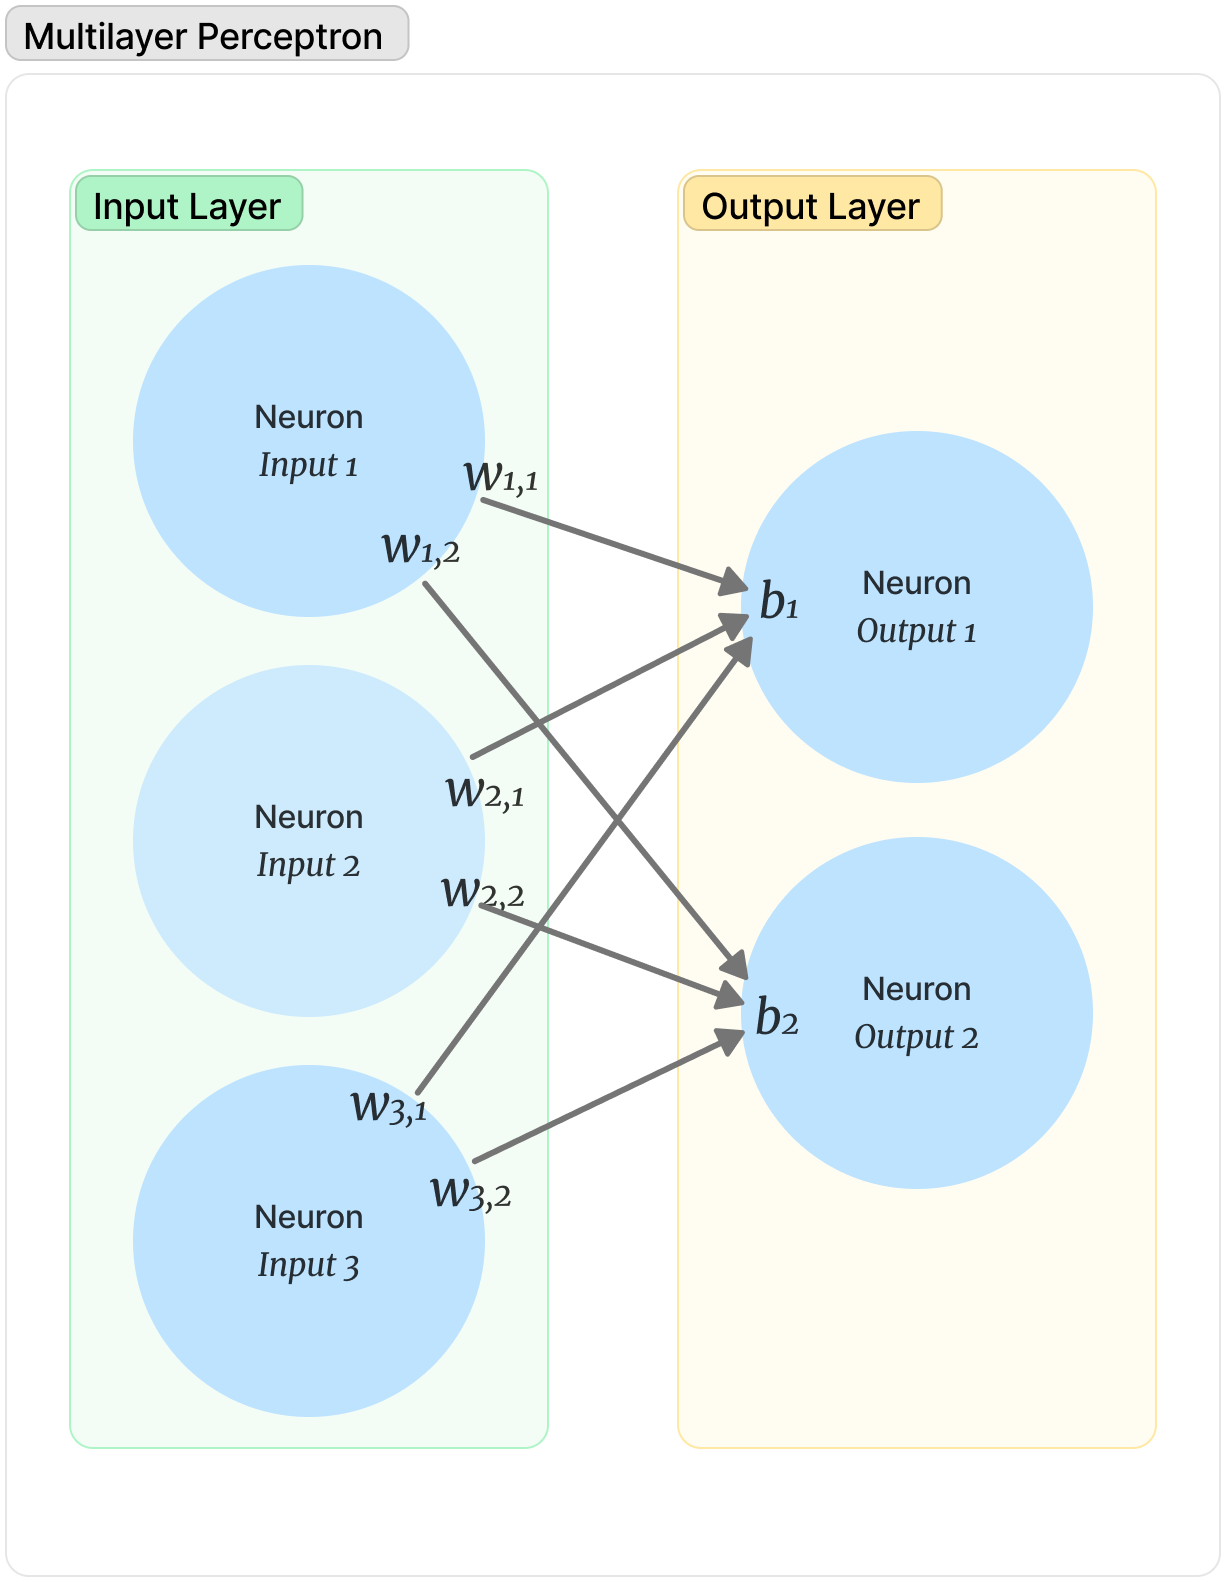 Flowchart showing relationship between neurons in Input and Output layers